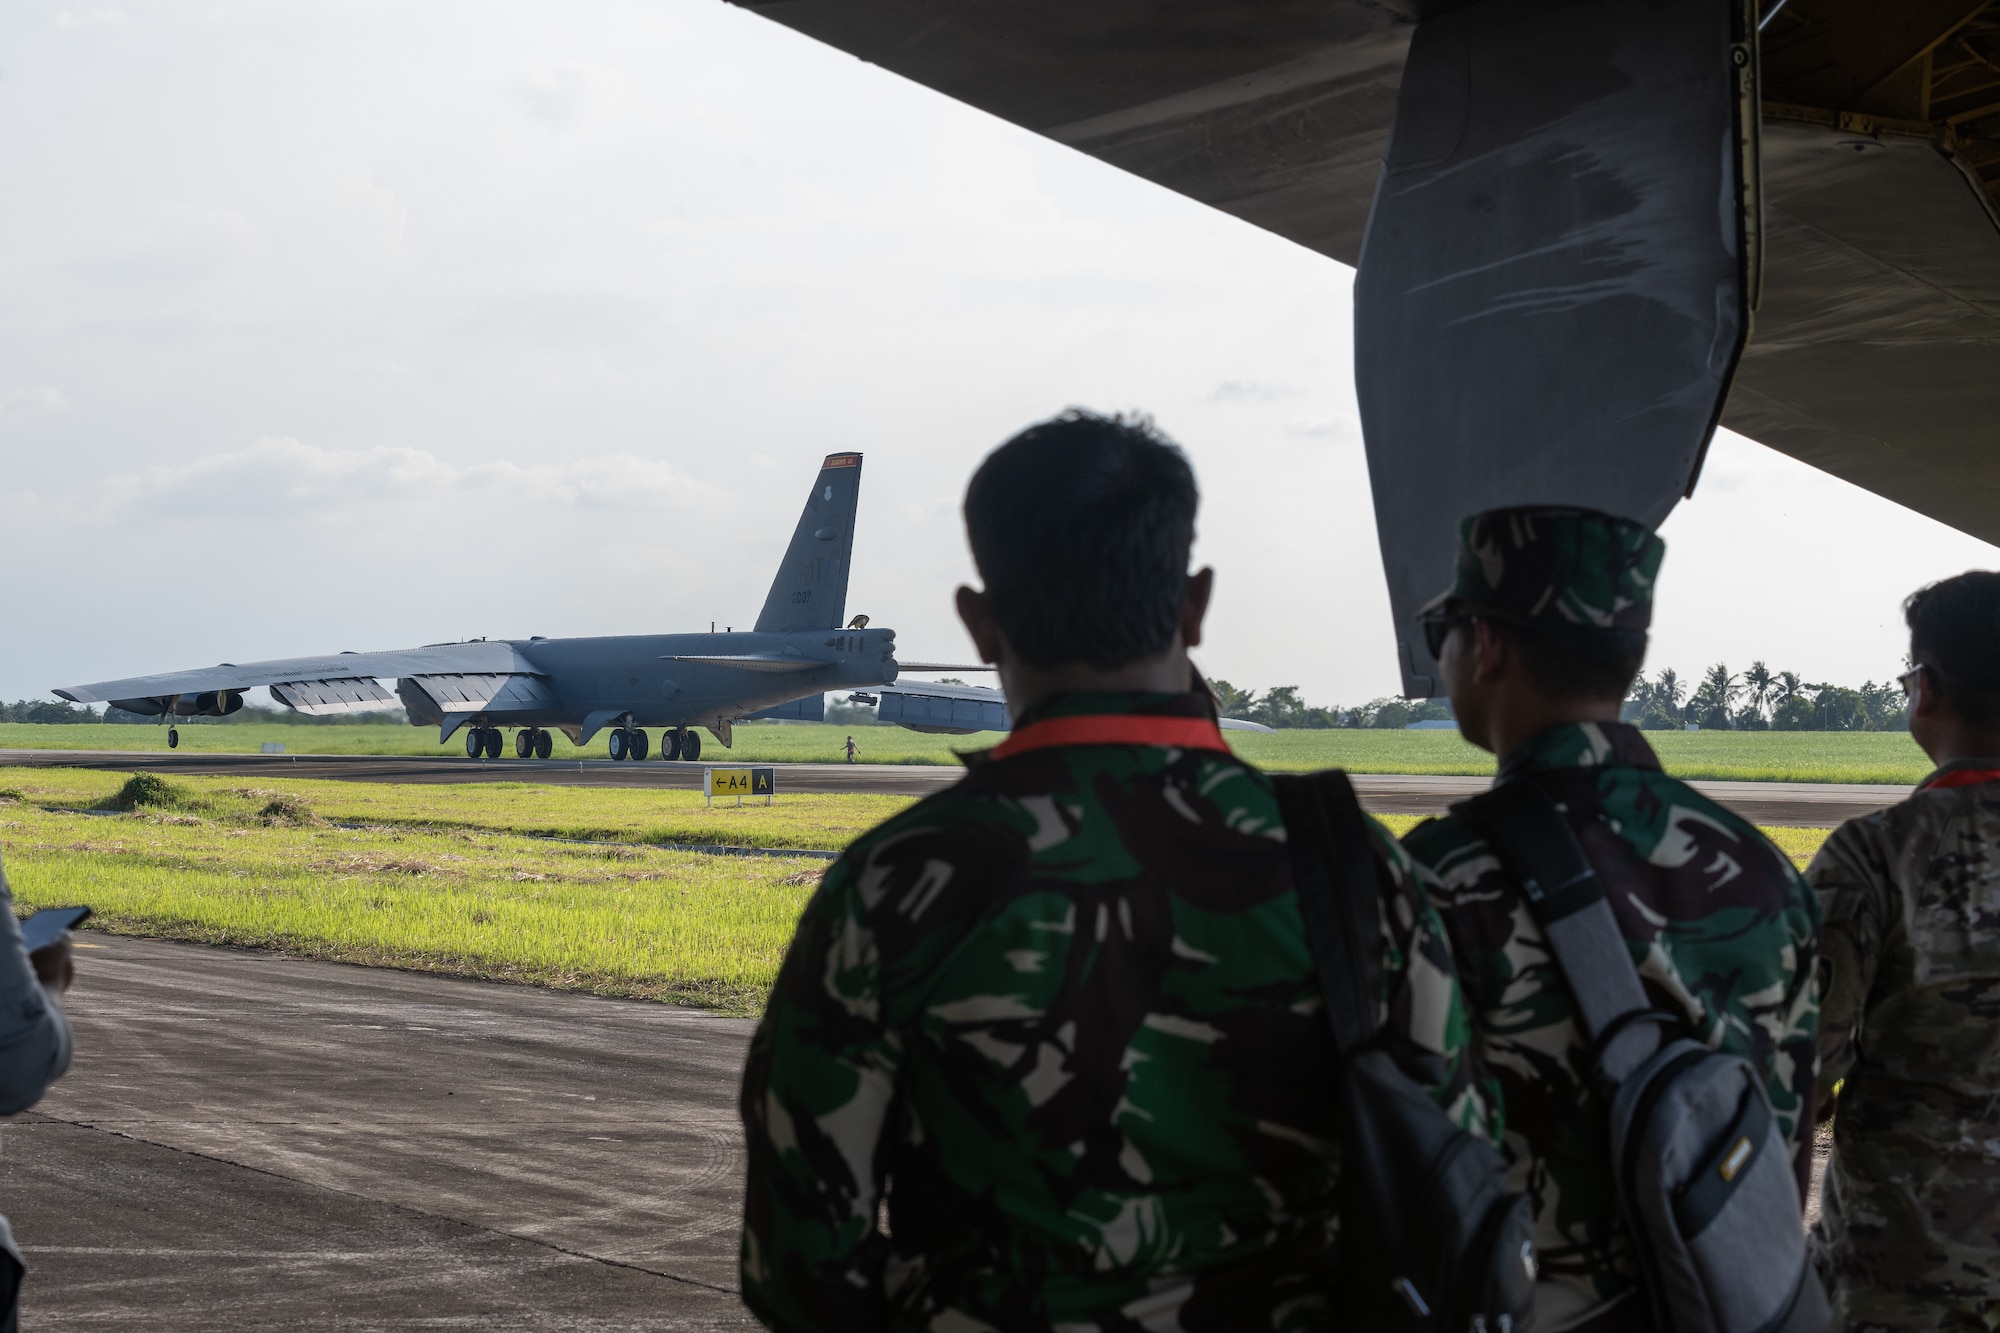 Members of the Tentara Nasional Indonesia Angkatan Udara, or Indonesian Air Force, seek shade under the wing of a U.S. Air Force B-52H Stratofortress assigned to the 23rd Bomb Squadron at Minot Air Force Base, North Dakota, while a second 23rd BS B-52 taxis on the runway upon landing at the Kualanamu International Airport in Medan, Indonesia, June 19, 2023. The arrival of the B-52s marked the first time U.S. Air Force B-52s had landed on Indonesian soil. (U.S. Air Force photo by Tech. Sgt. Zade Vadnais)